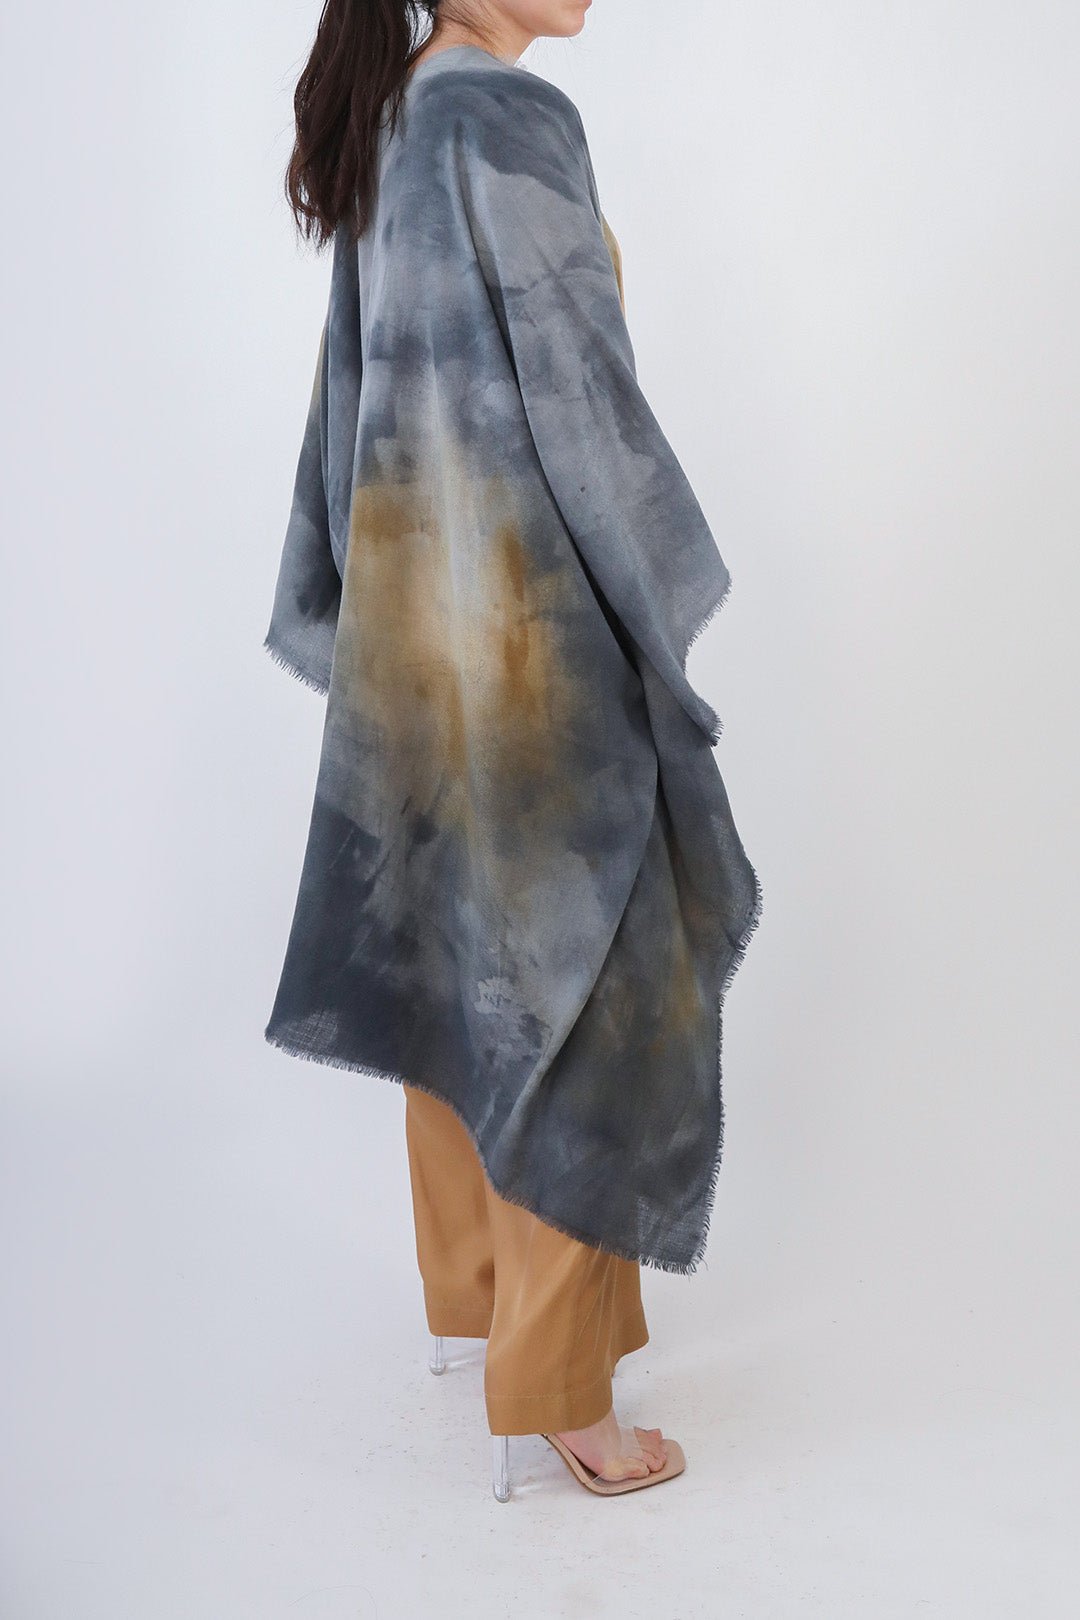 LANAI CARRIAGI CASHMERE LONG CAPE WRAP IN HAND-DYED MARONE GRIGGIO - Jarbo